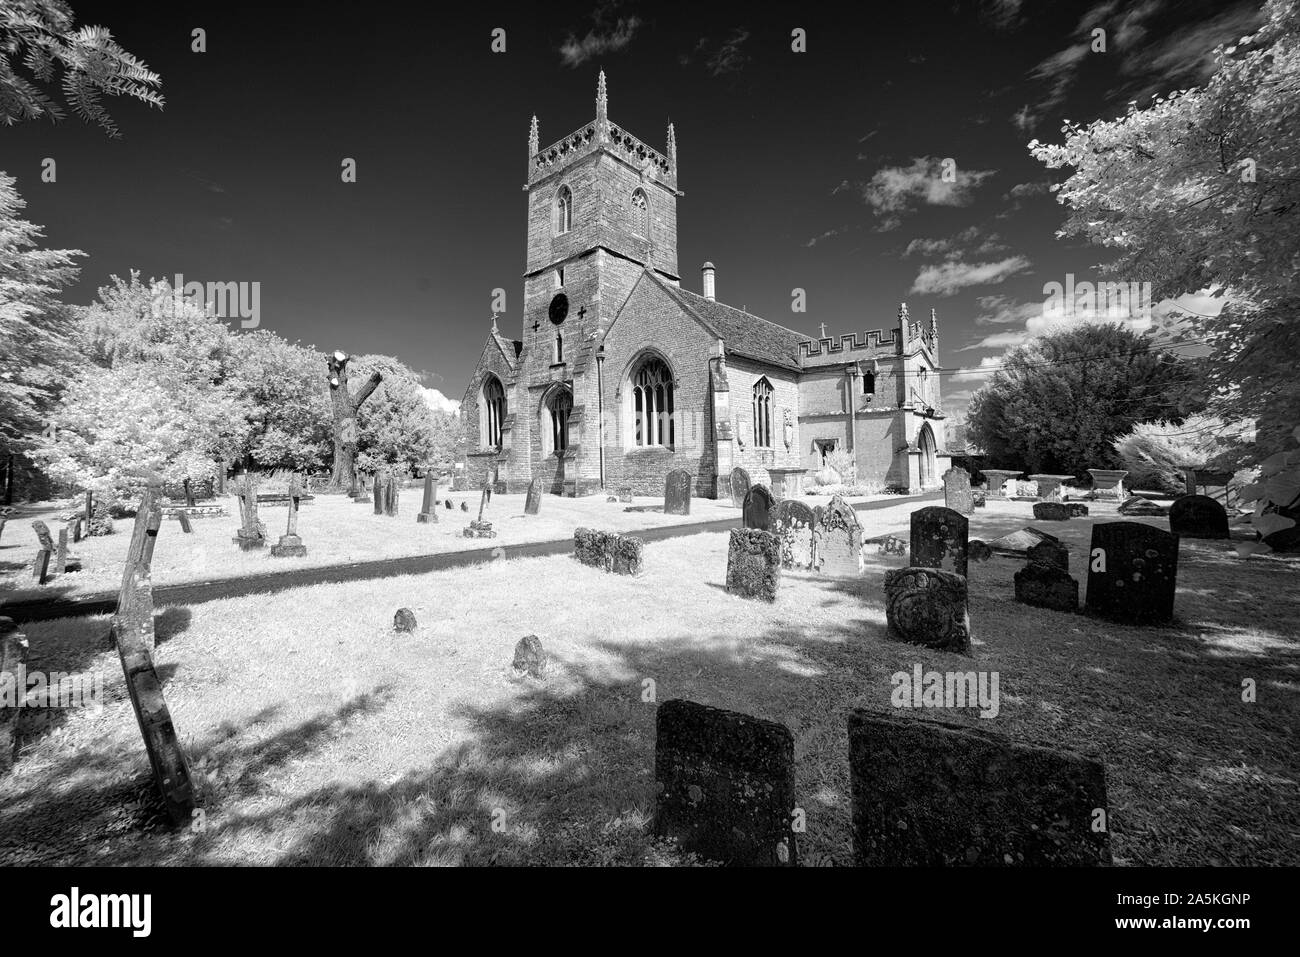 Black and white image of the grade 1 listed, Norman church of All Saints  in the Wiltshire village of Crudwell near Cirencester. Stock Photo